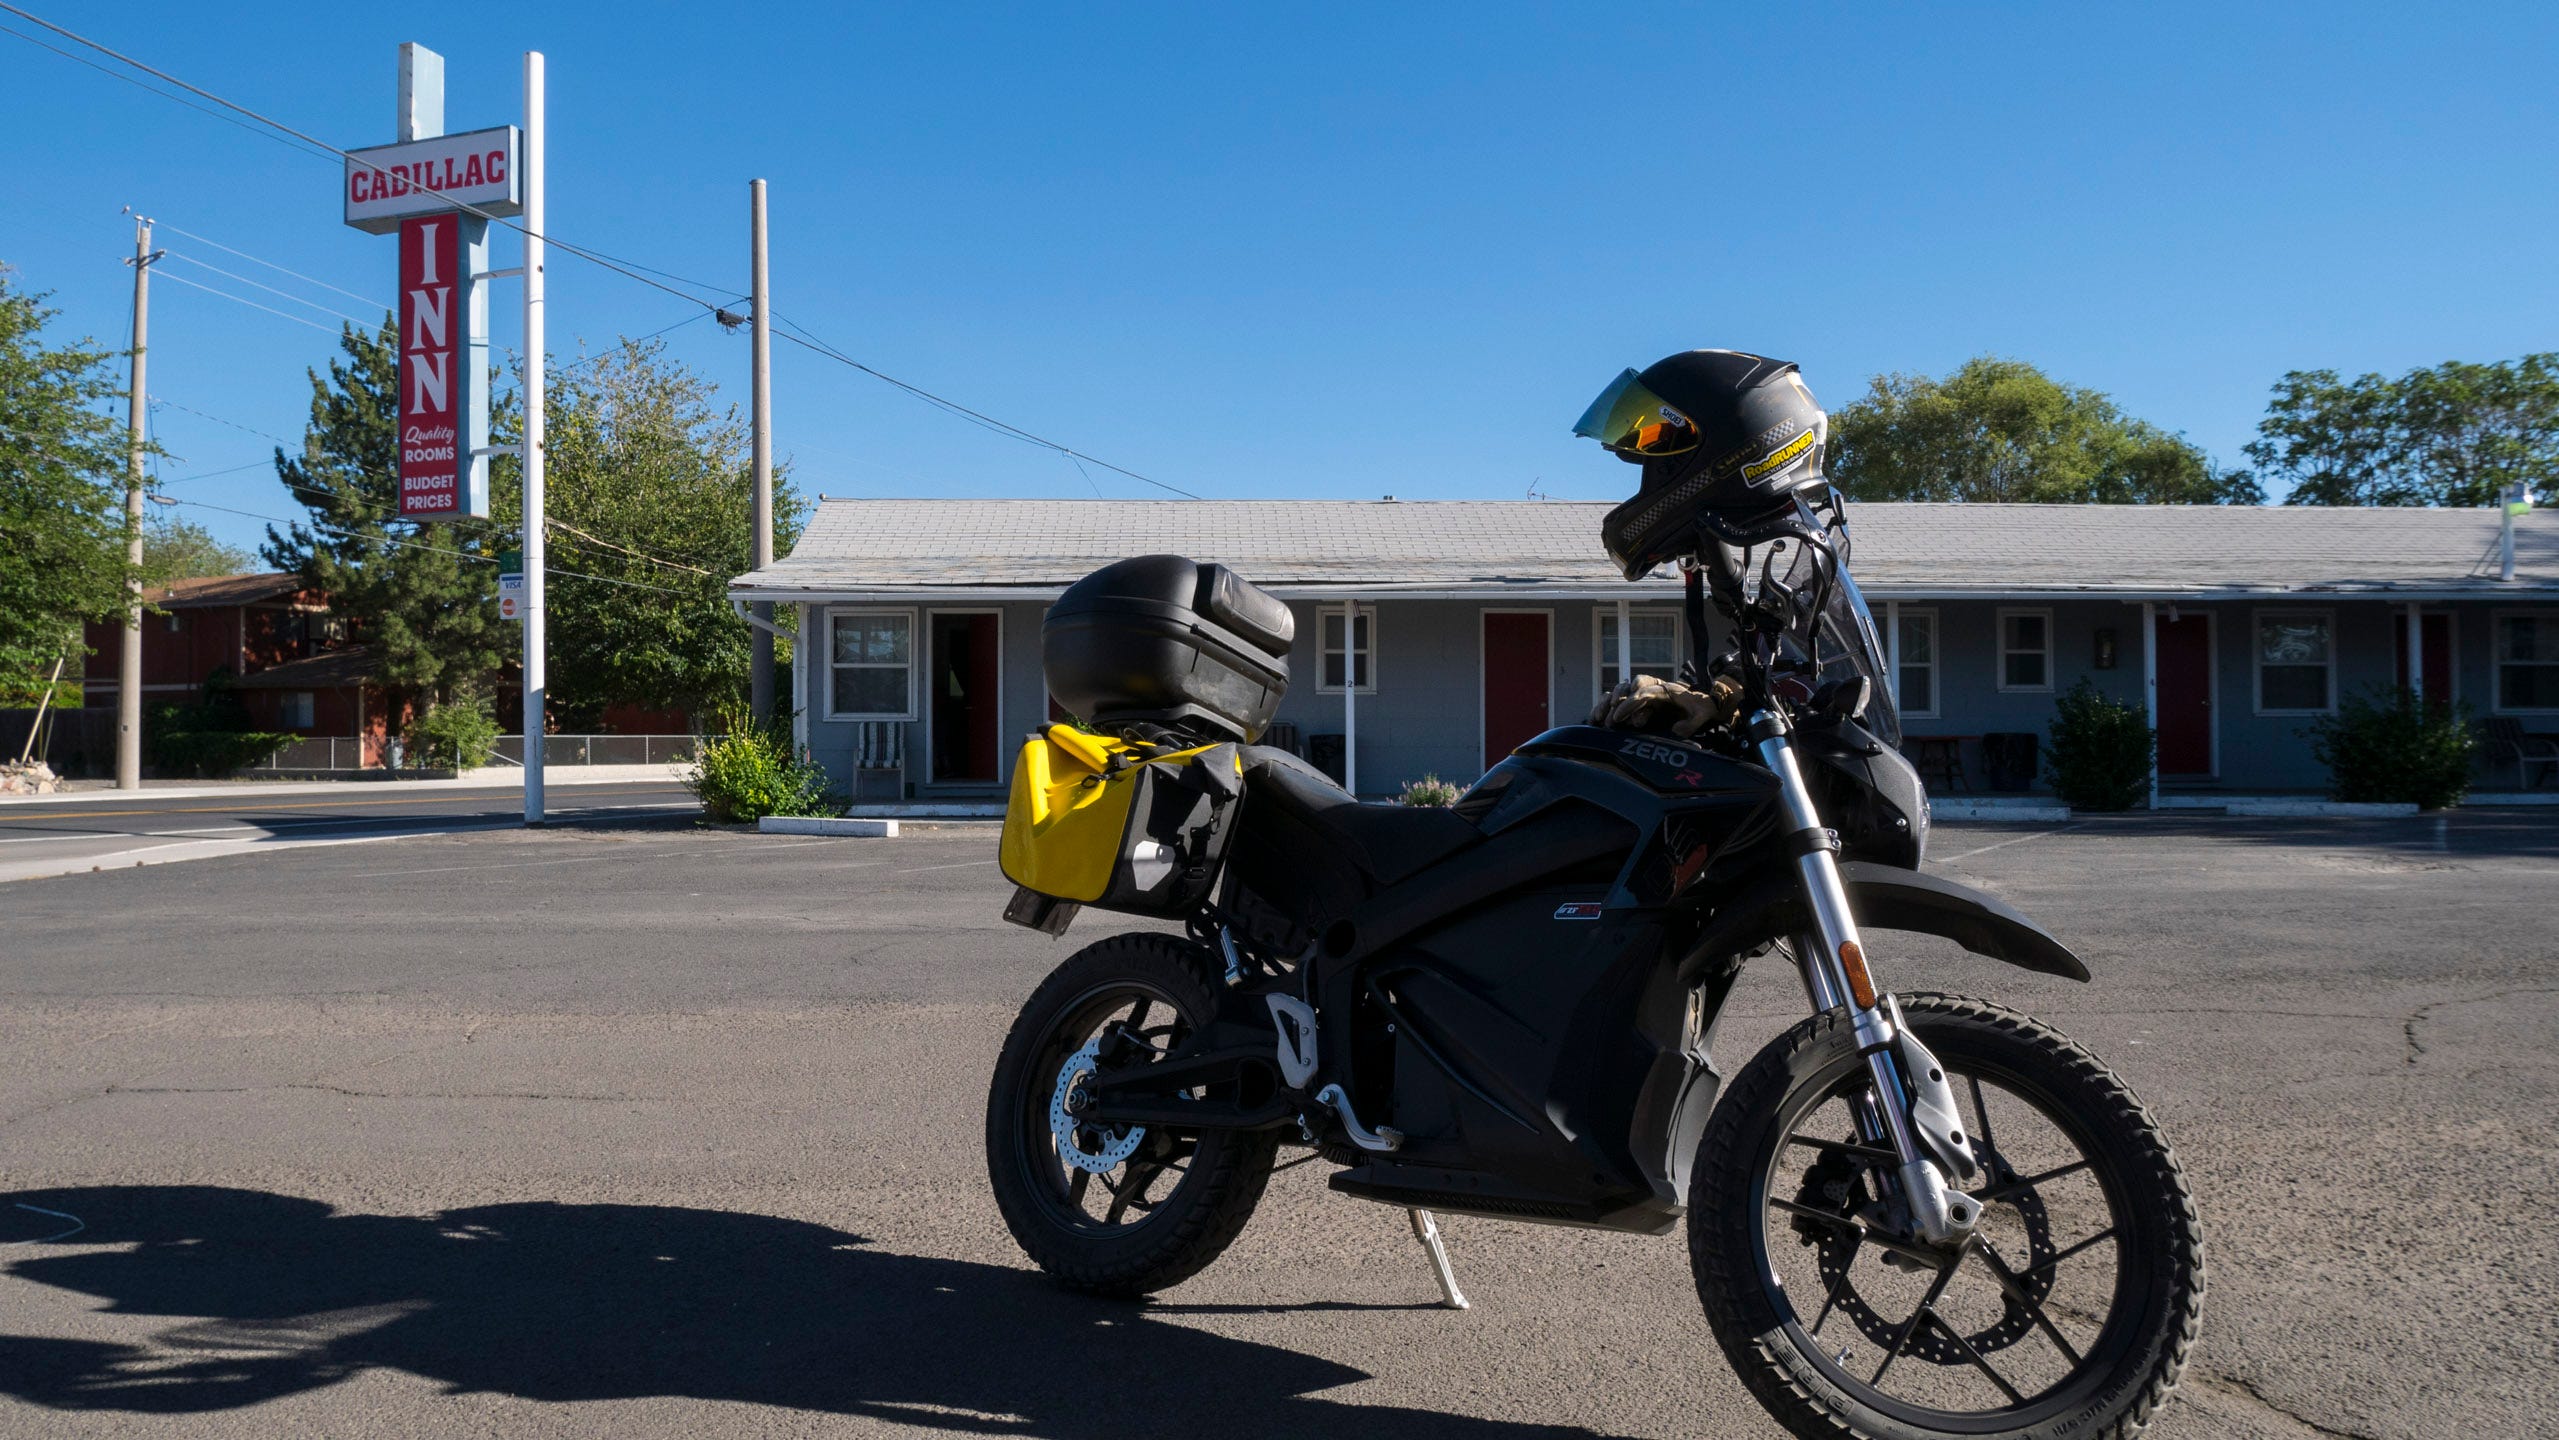 Photo of a black electric motorcycle with yellow bags in the parking courtyard of the Cadillac Inn. It's a sunny day but the sun is lower in the sky, causing the motorcycle to cast a long shadow on the asphalt. On the far side of the courtyard is one of the low-slung, one-story wings of the motel, with a nearly flat roof and red doors to the rooms opening up to the courtyard. By the street is the Cadillac Inn sign on a tall white pole.